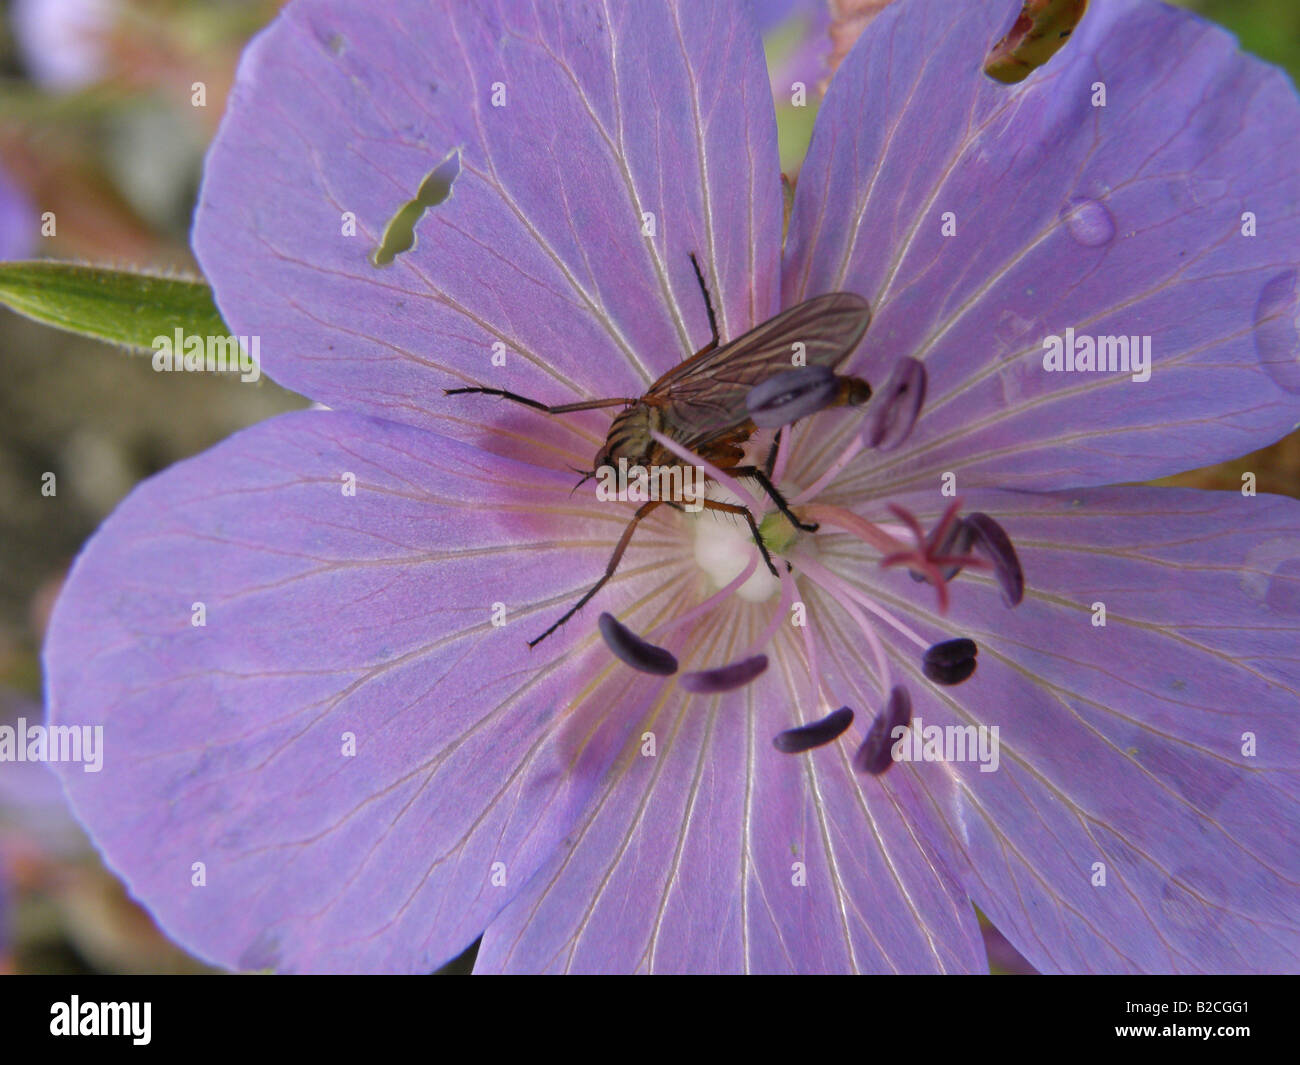 close-up detail of fly feeding at delicate flower of meadow cranesbill (Geranium pratense) Stock Photo